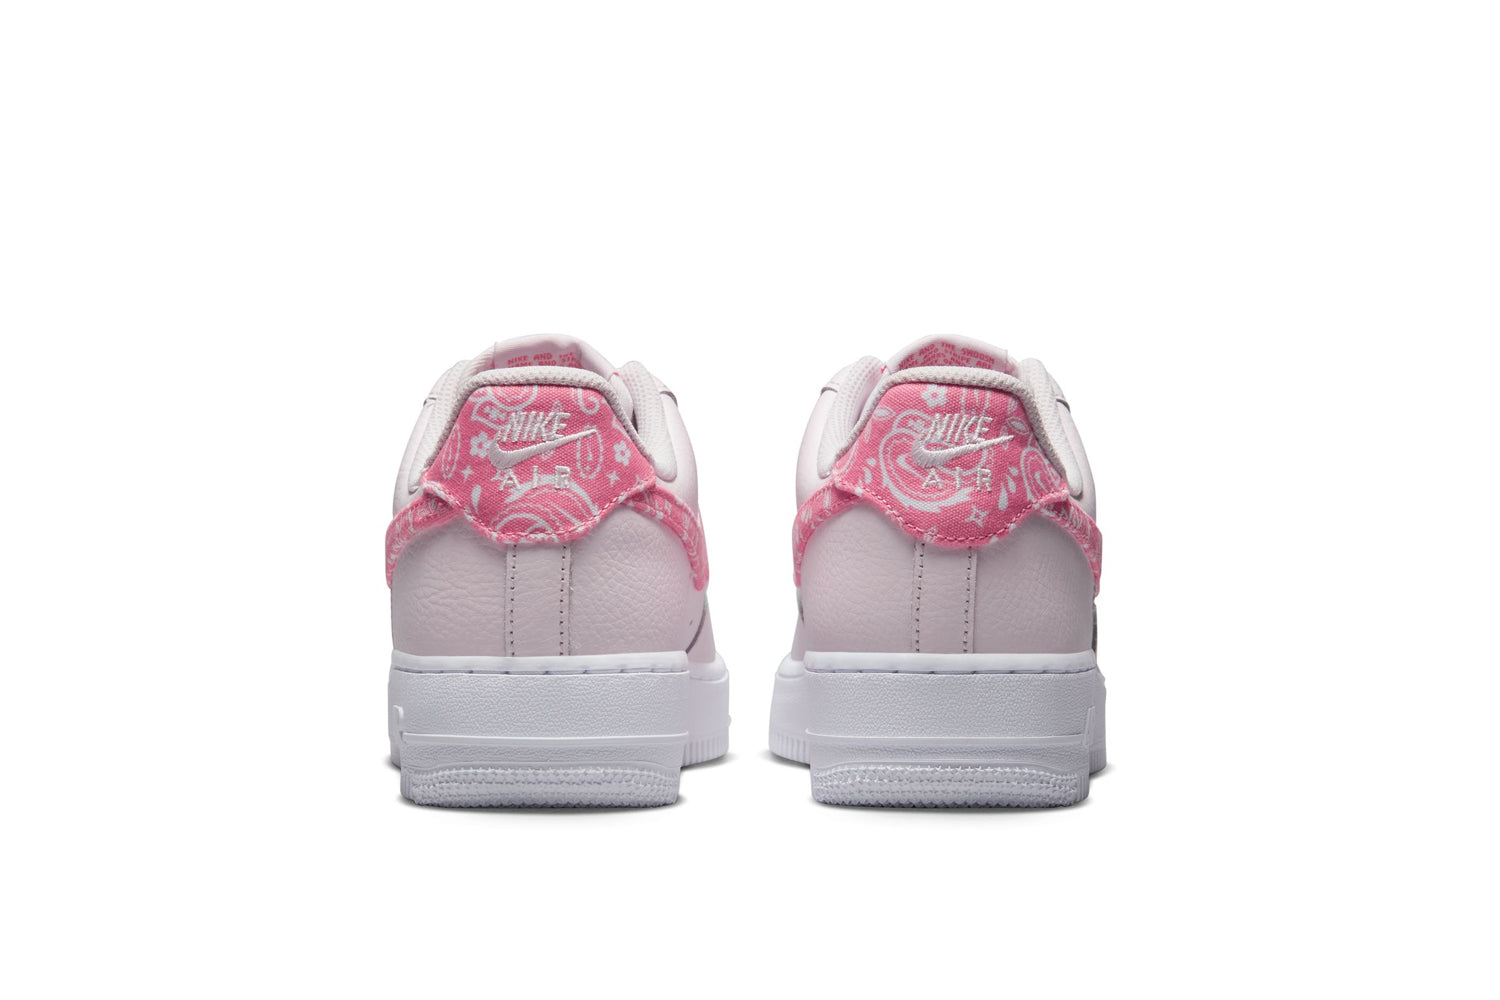 WOMEN'S AIR FORCE 1 LOW '07 PAISLEY PACK PINK